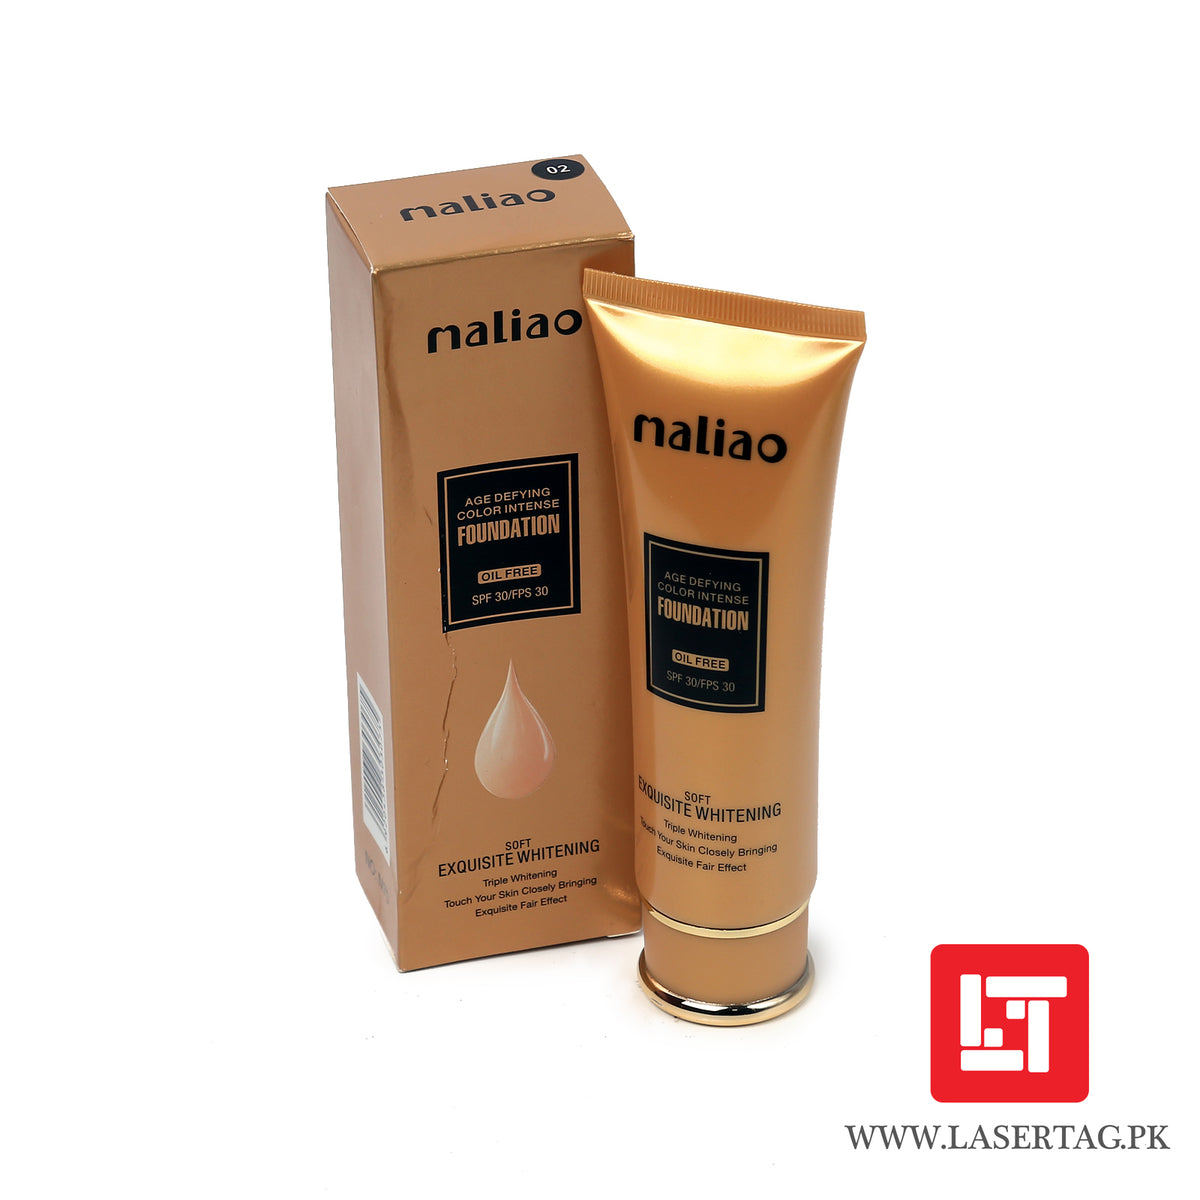 Maliao Age Defying Color Intense Foundation Oil Free Soft Exquisite Whitening M70-02 80g freeshipping - lasertag.pk